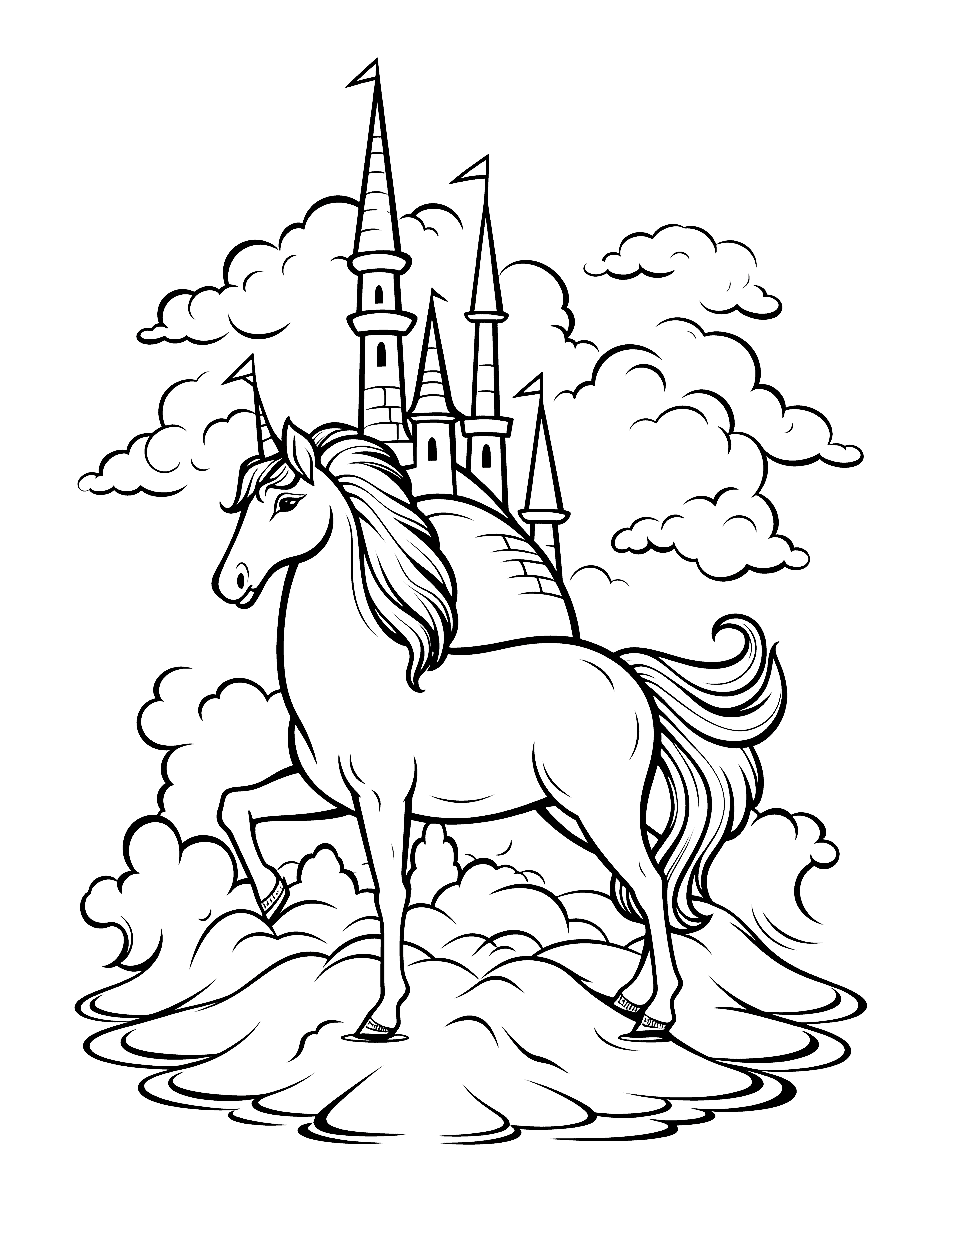 Unicorn and the Floating Island Coloring Page - A unicorn on a floating island with a castle in the background.